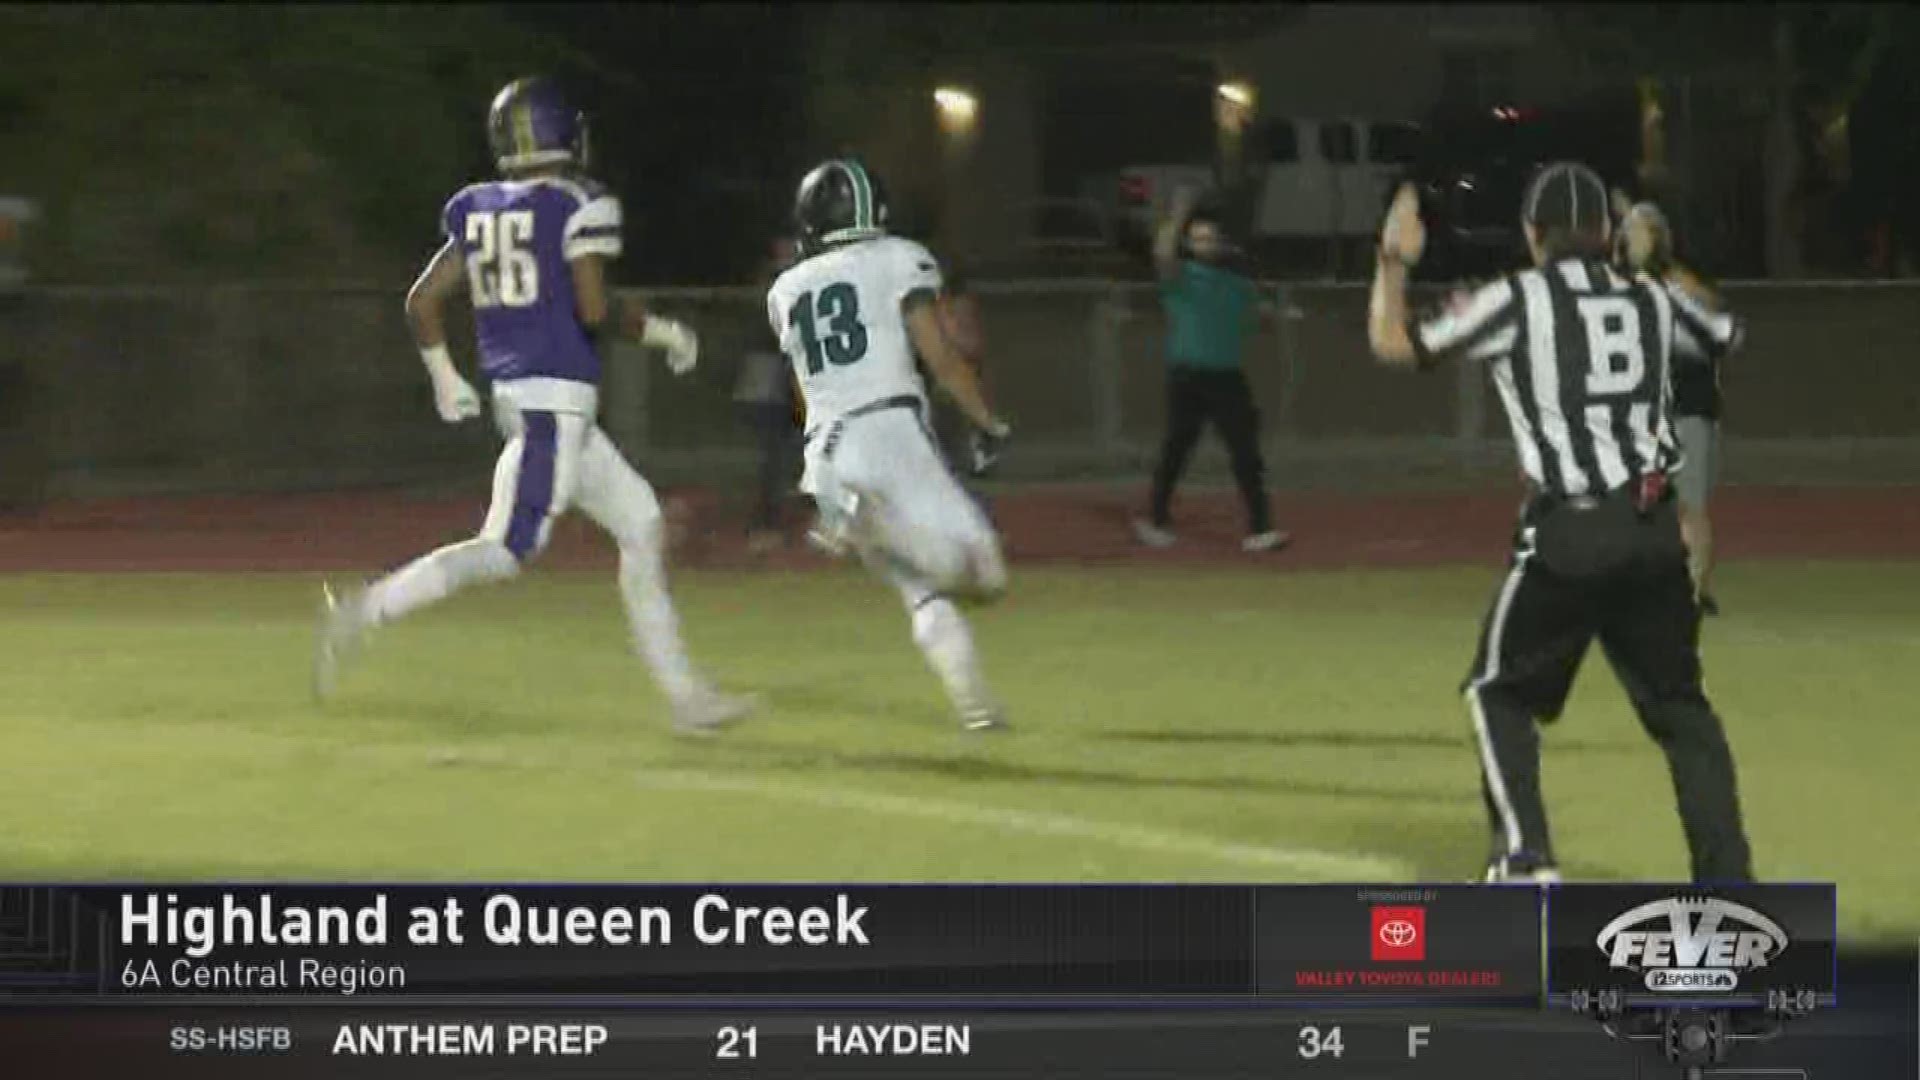 The Highland offense was full of touchdowns as they routed Queen Creek 38-7.